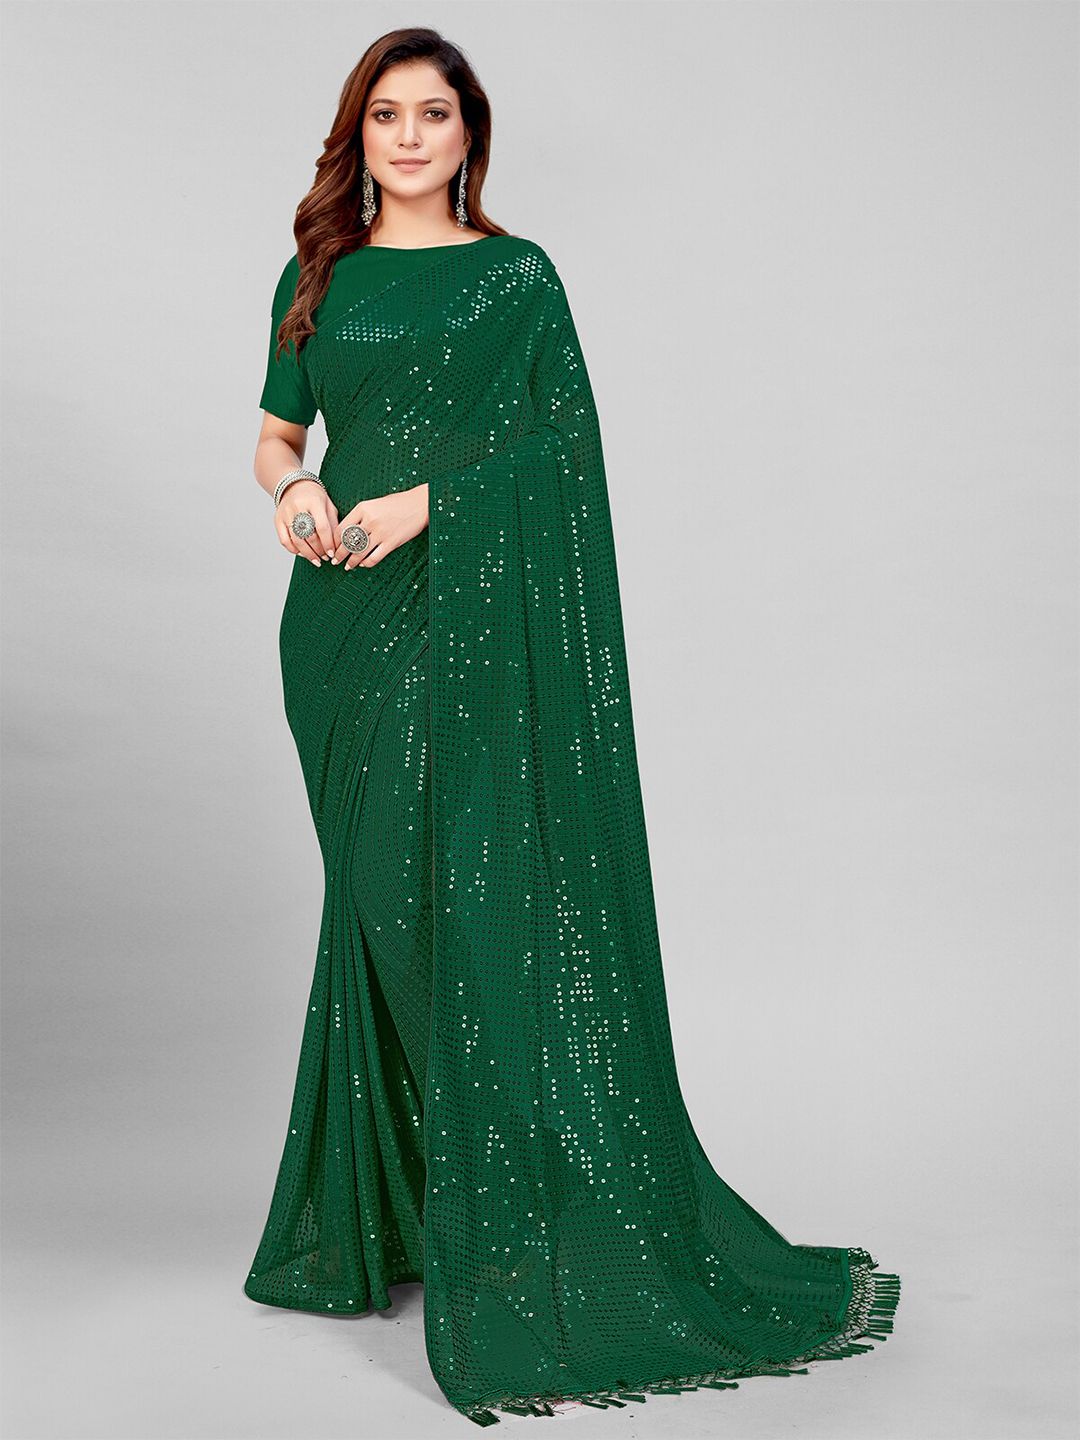 Pratham Blue Green Embellished Sequinned Pure Georgette Saree Price in India